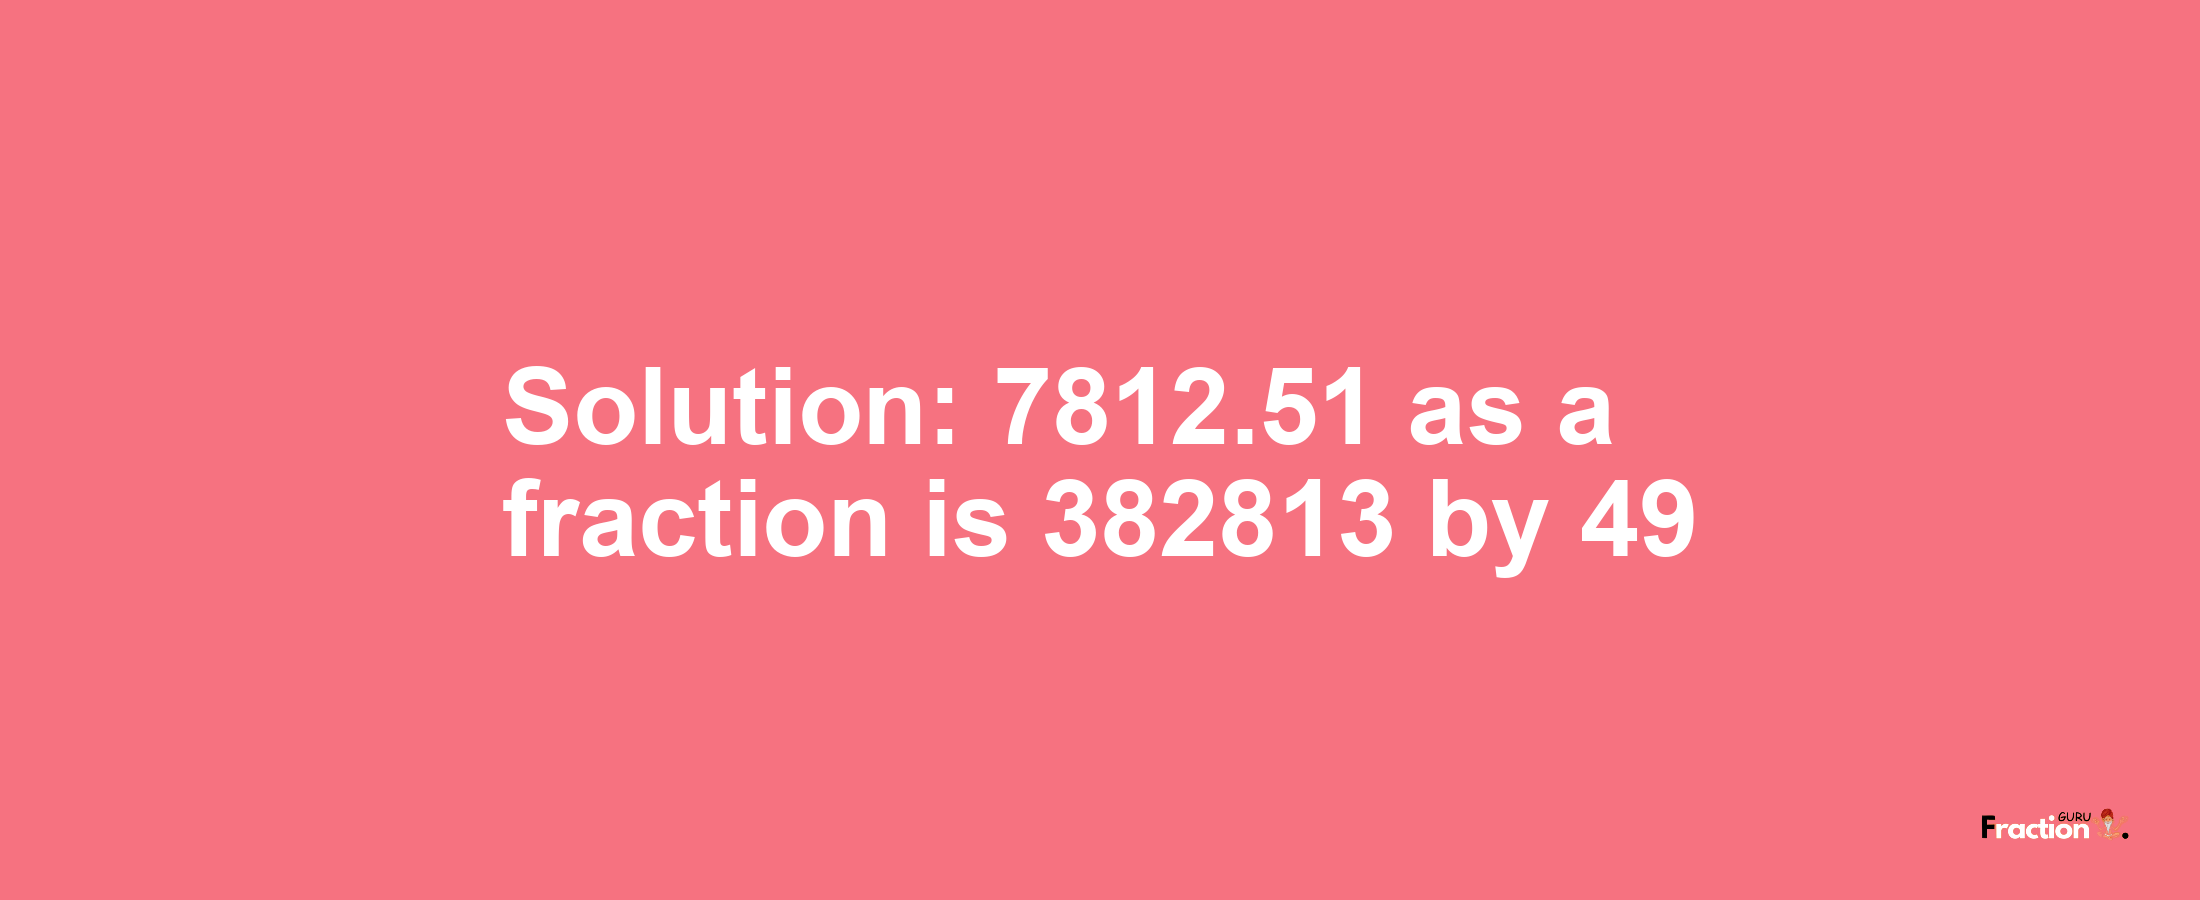 Solution:7812.51 as a fraction is 382813/49